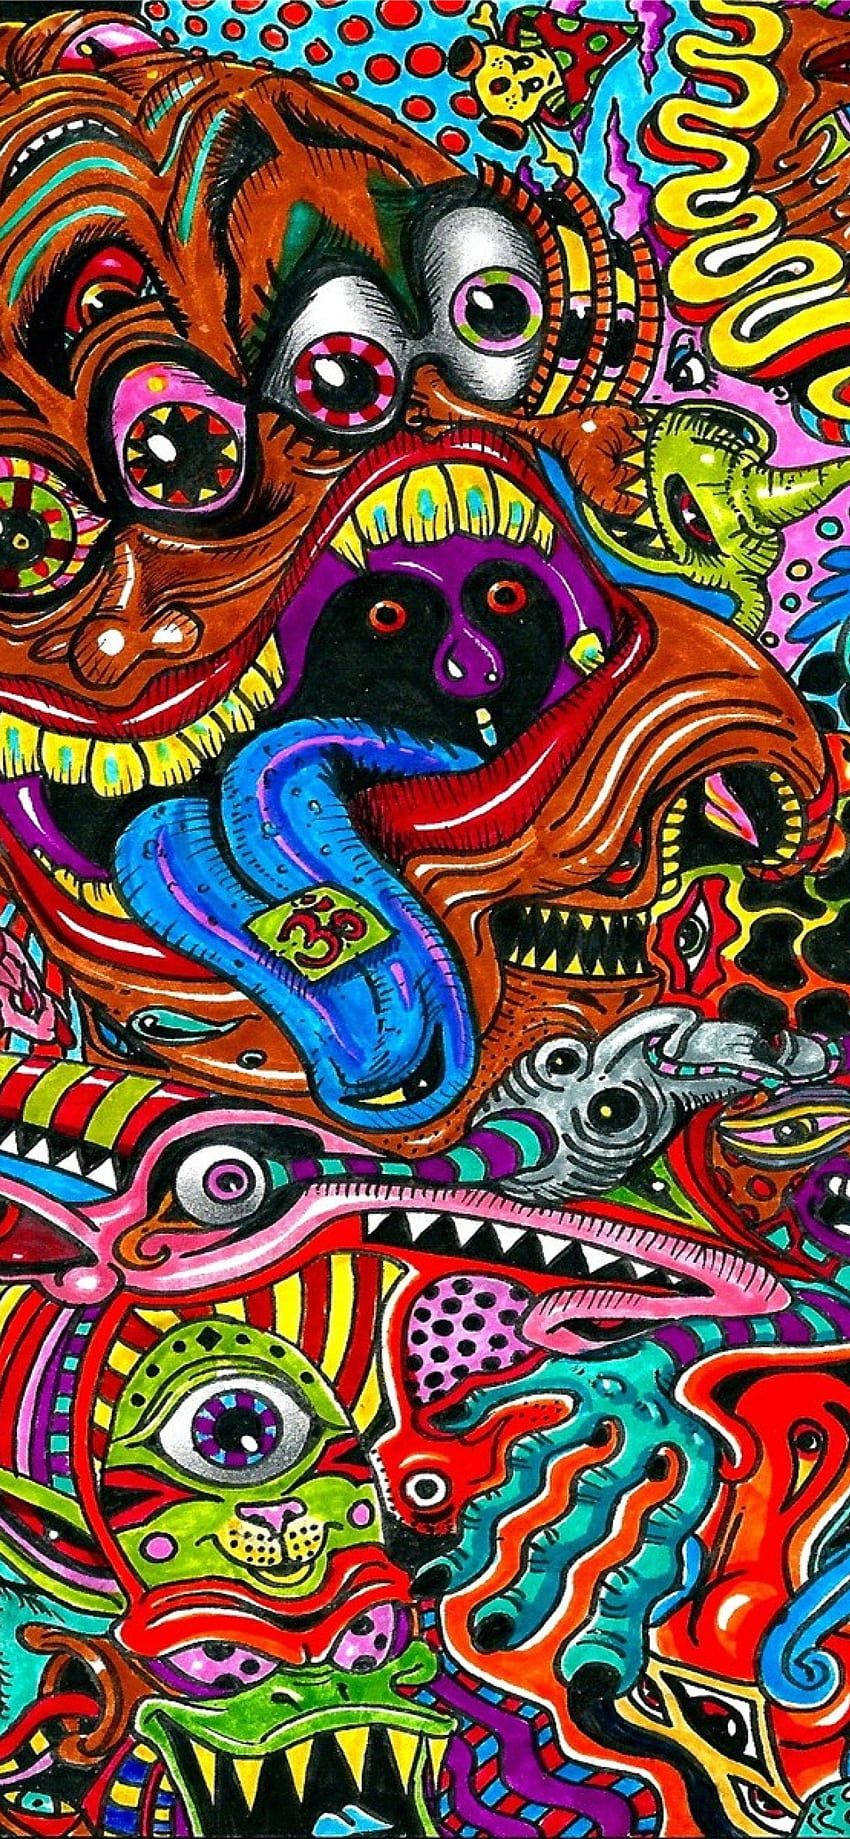 A colorful drawing of a creature with many eyes and tentacles. - Psychedelic